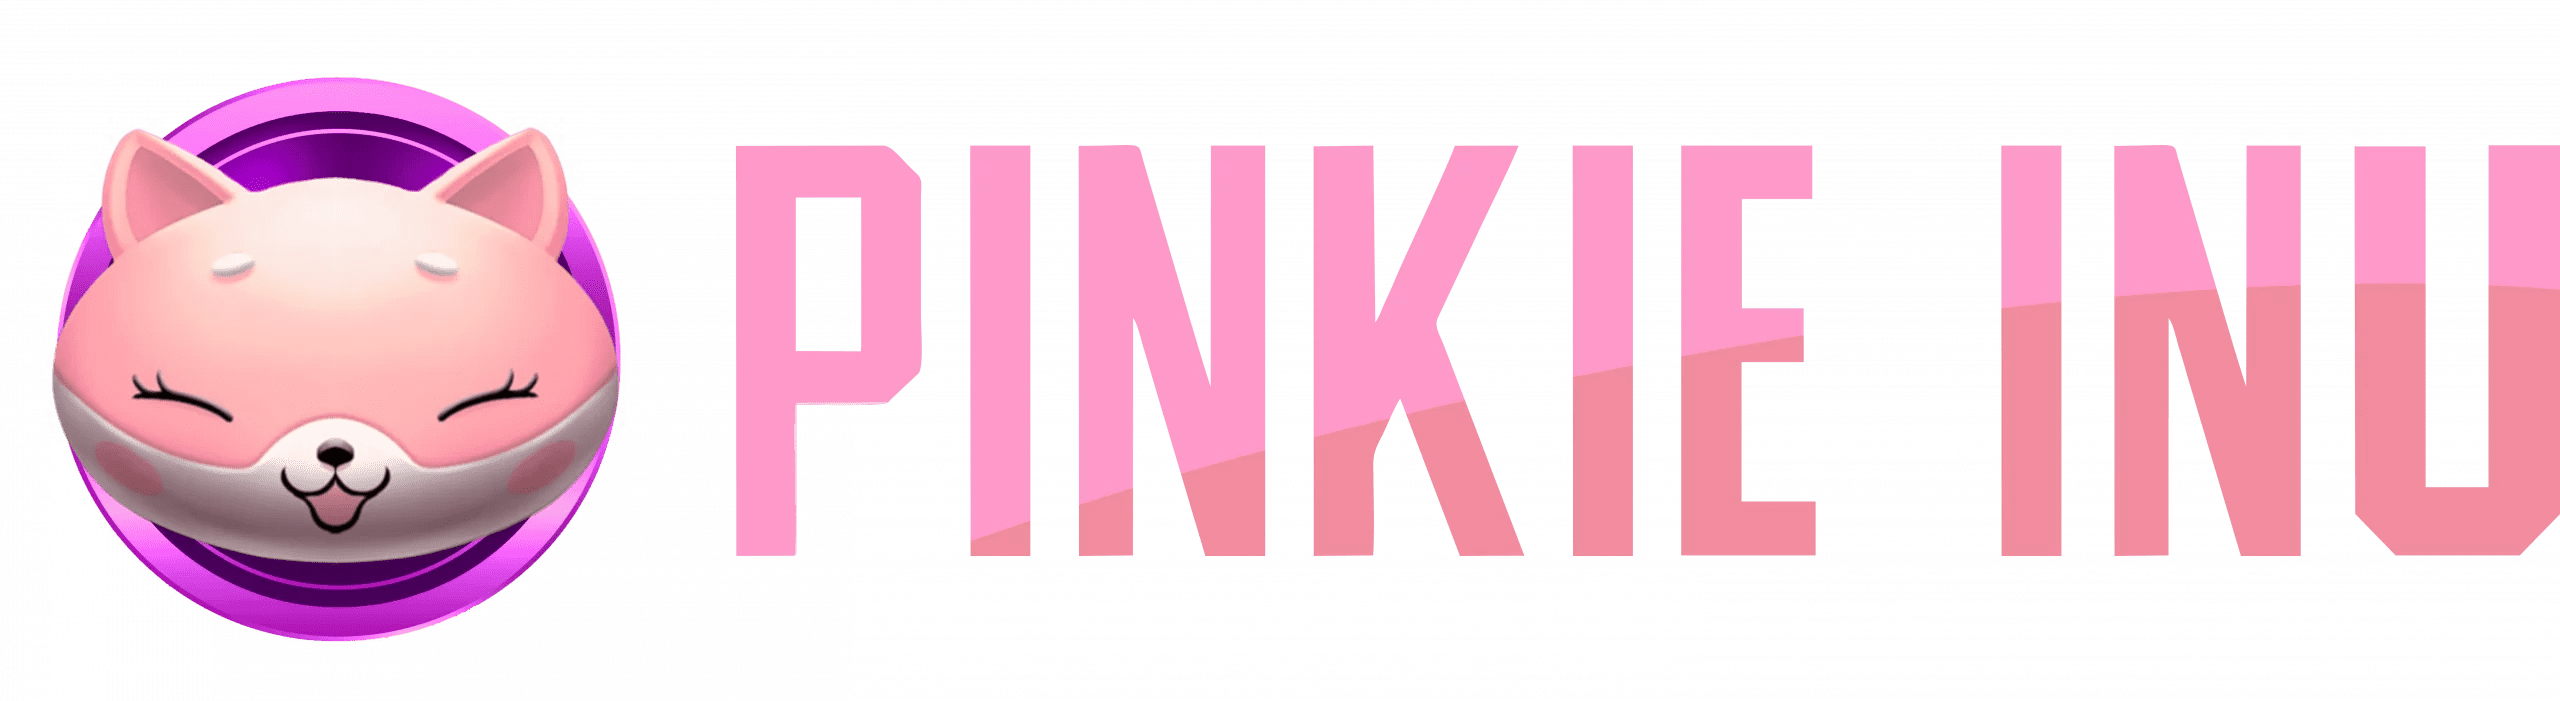 , PINKIE – THE CONVERGENCE OF INCLUSIVENESS, BLOCKCHAIN INNOVATION, AND METAVERSE FASHION